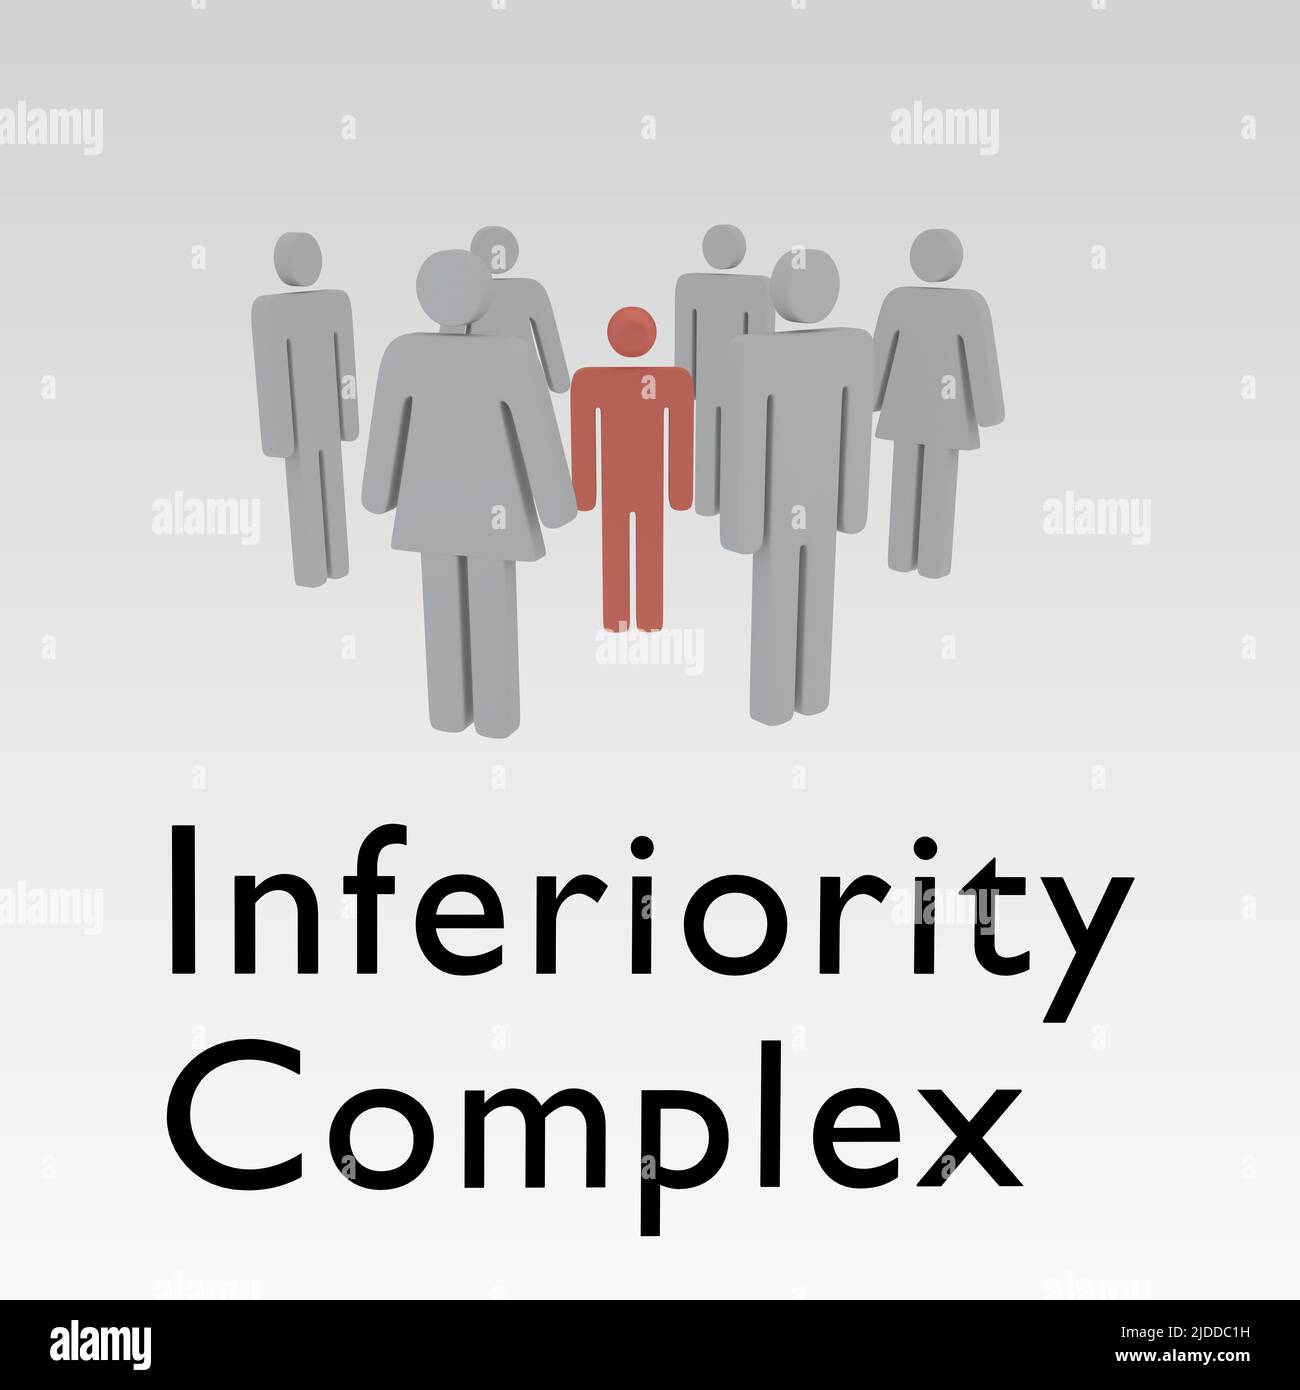 3D illustration of silhouettes of men and women surrounding an exaggerated small person, along with the title Inferiority Complex. Stock Photo